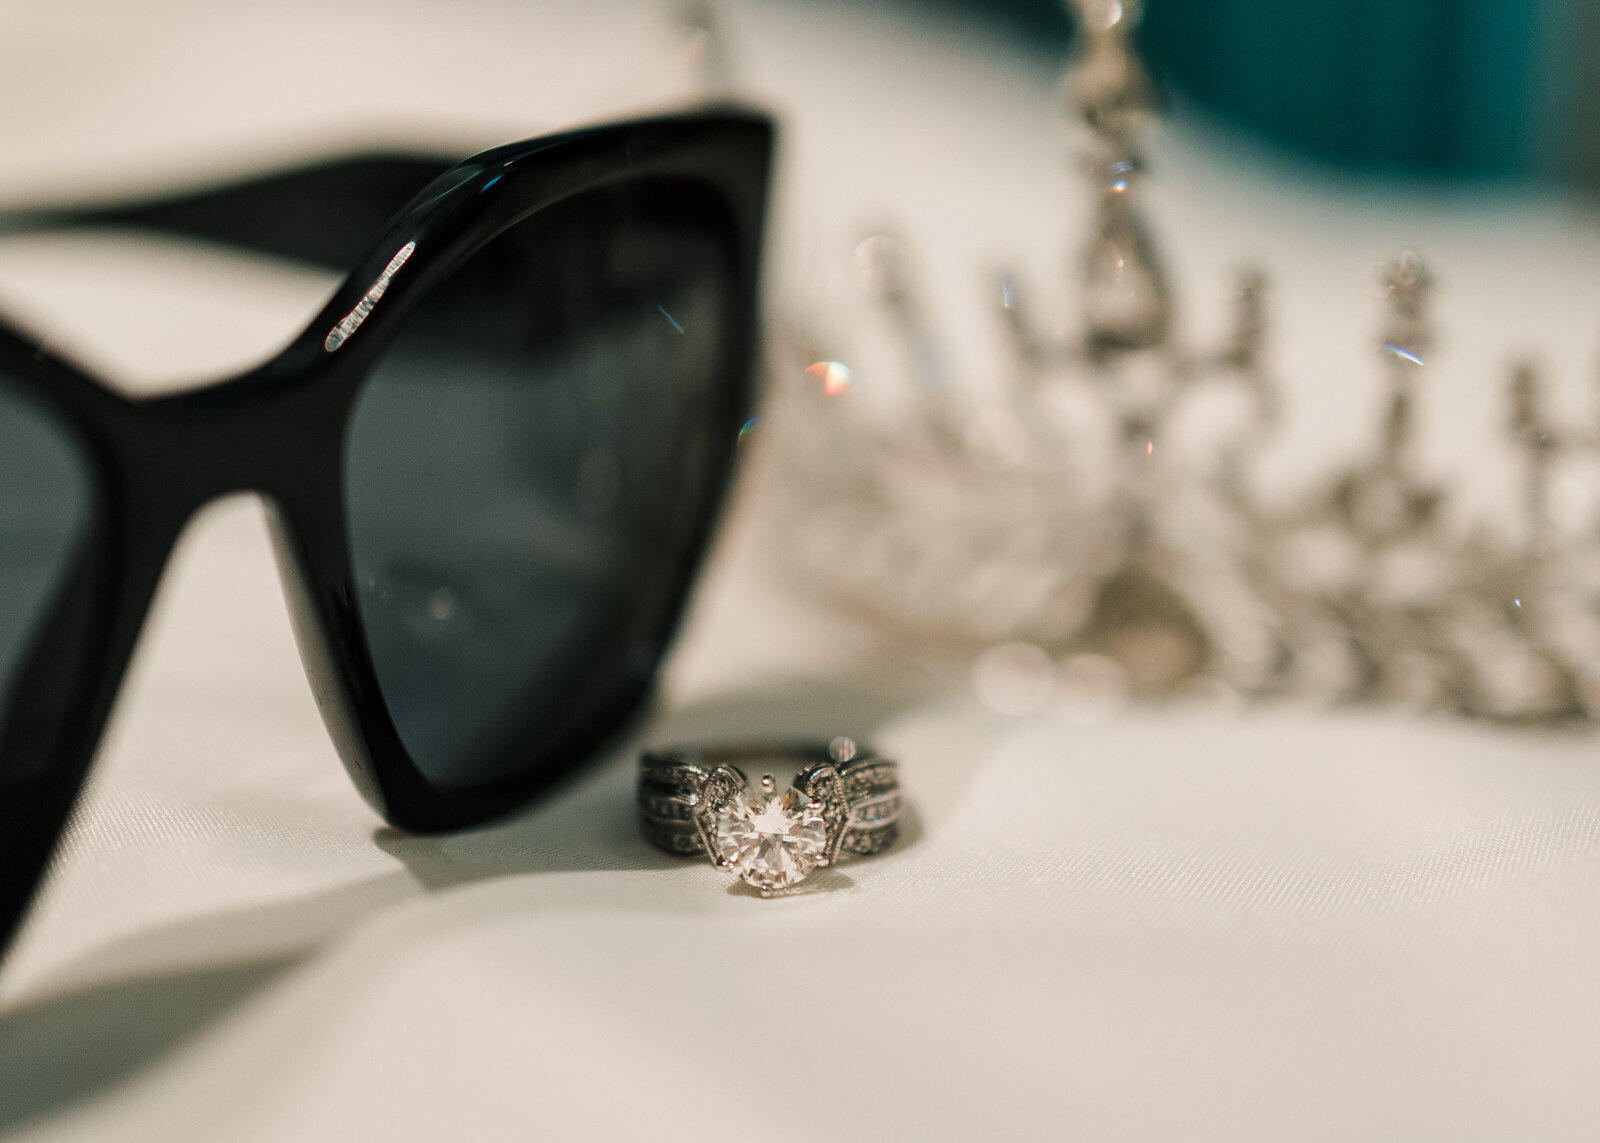 Sunglasses, wedding ring and crown